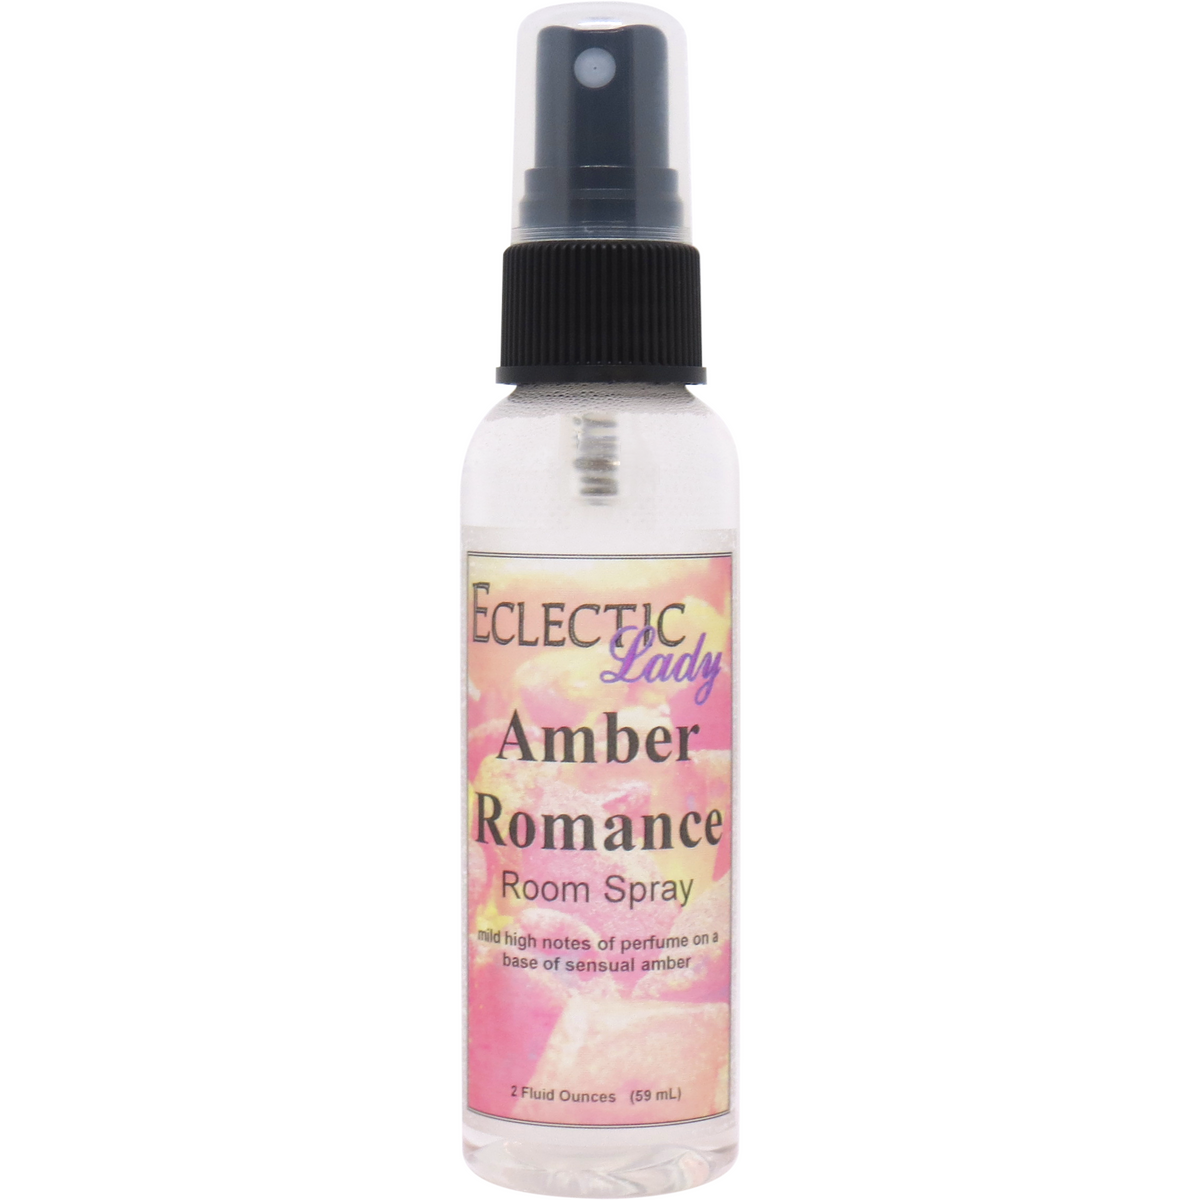 Amber Romance Room Spray by Eclectic Lady, 4 Ounces, Fragrant Aromatic Room Mist for Home, Room, Office, Size: 4 Fluid Ounces, Clear